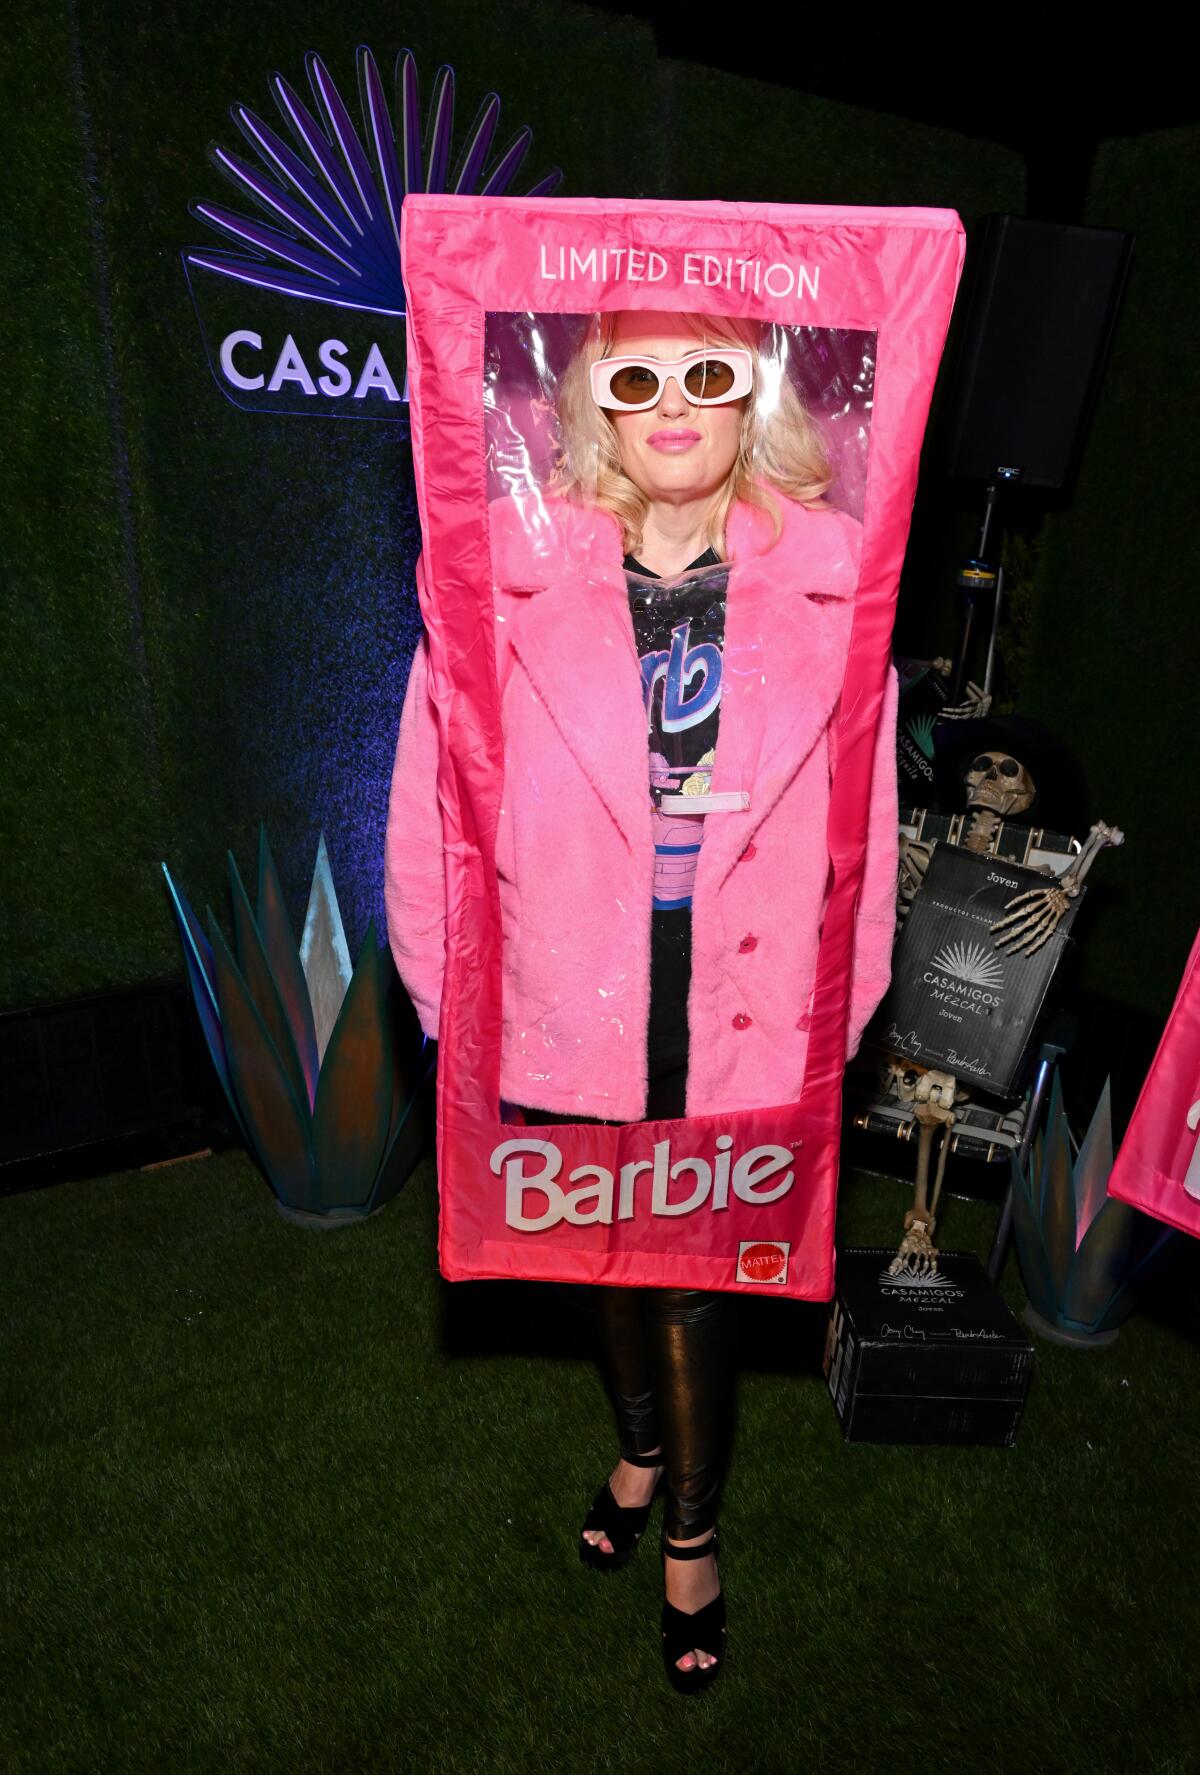 A blond woman with sunglasses posing in a giant fake Barbie box